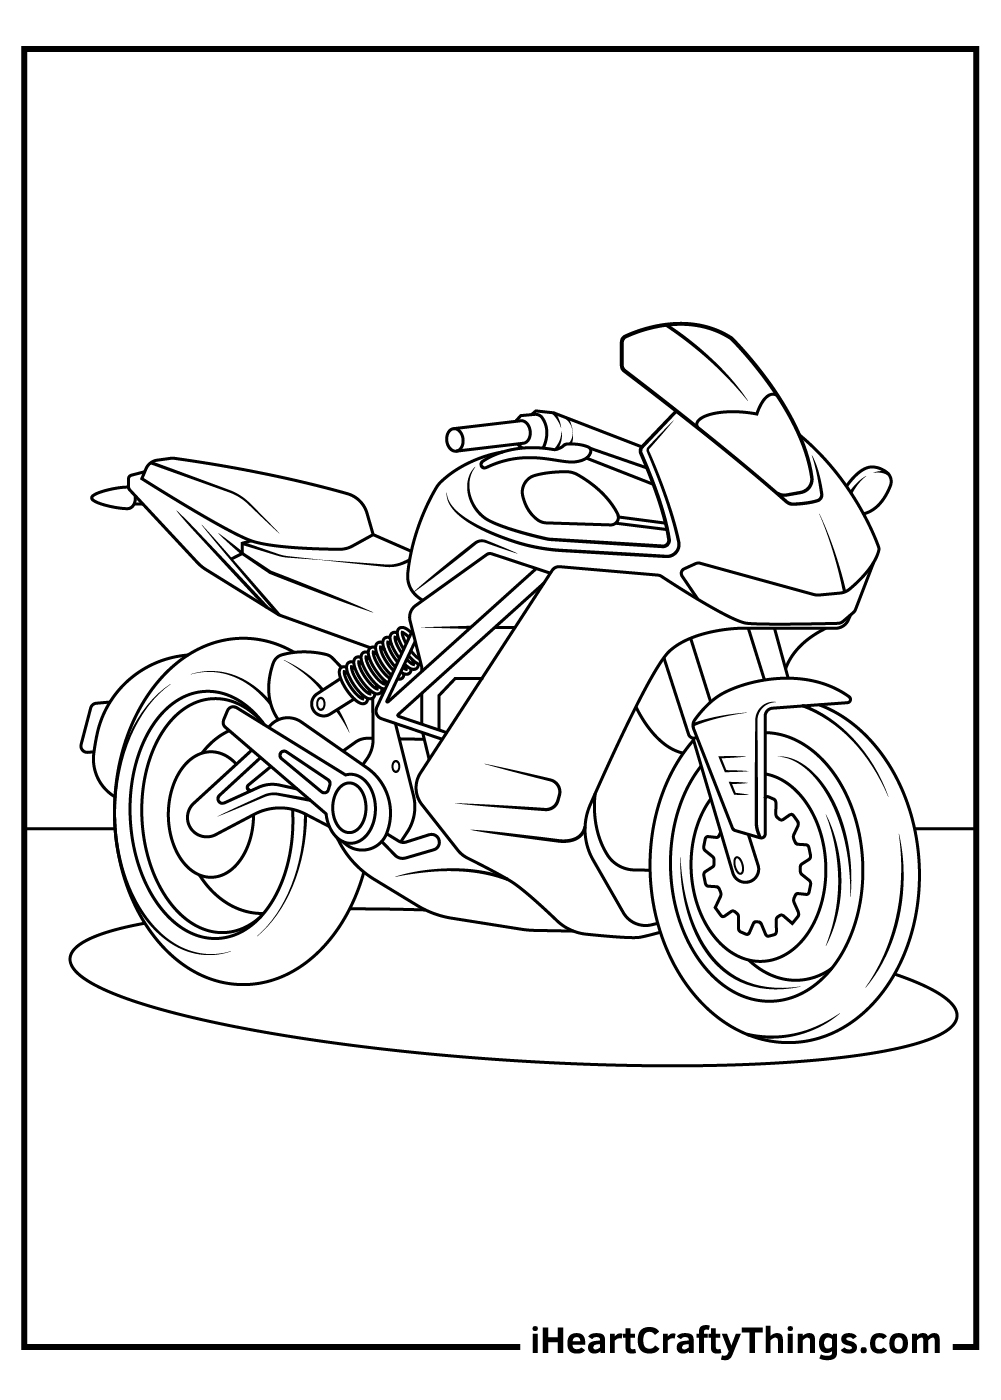 Motorcycle coloring pages free printables